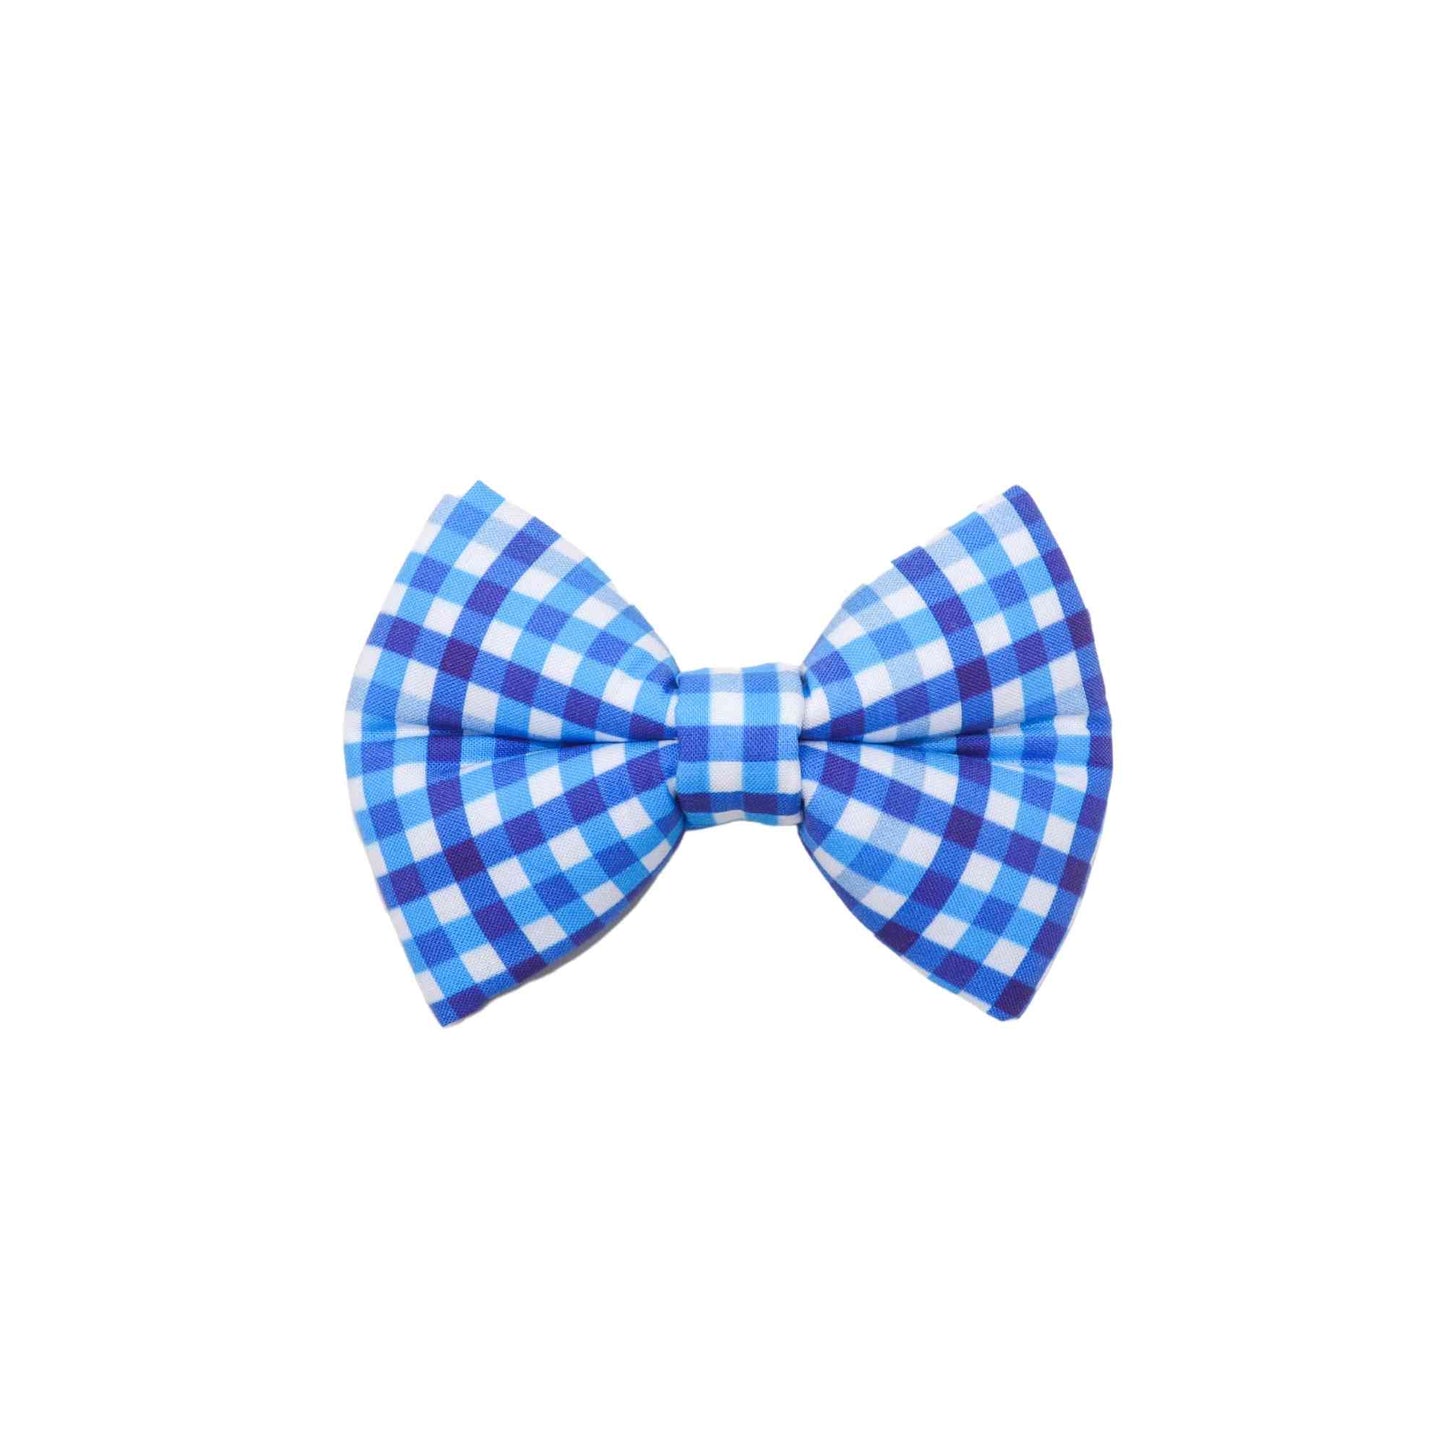 Add a touch of charm to your furry friend's summer style with our royal blue gingham dog bow tie! Our bow tie is designed to fit over your pet's collar, making it easy and comfortable to wear. Handmade in Michigan with high-quality materials, this bow tie is durable and built to last. The classic gingham pattern is perfect for summer occasions, making it a great addition to your pet's wardrobe. Shop now and give your furry friend a stylish accessory that is sure to impress!